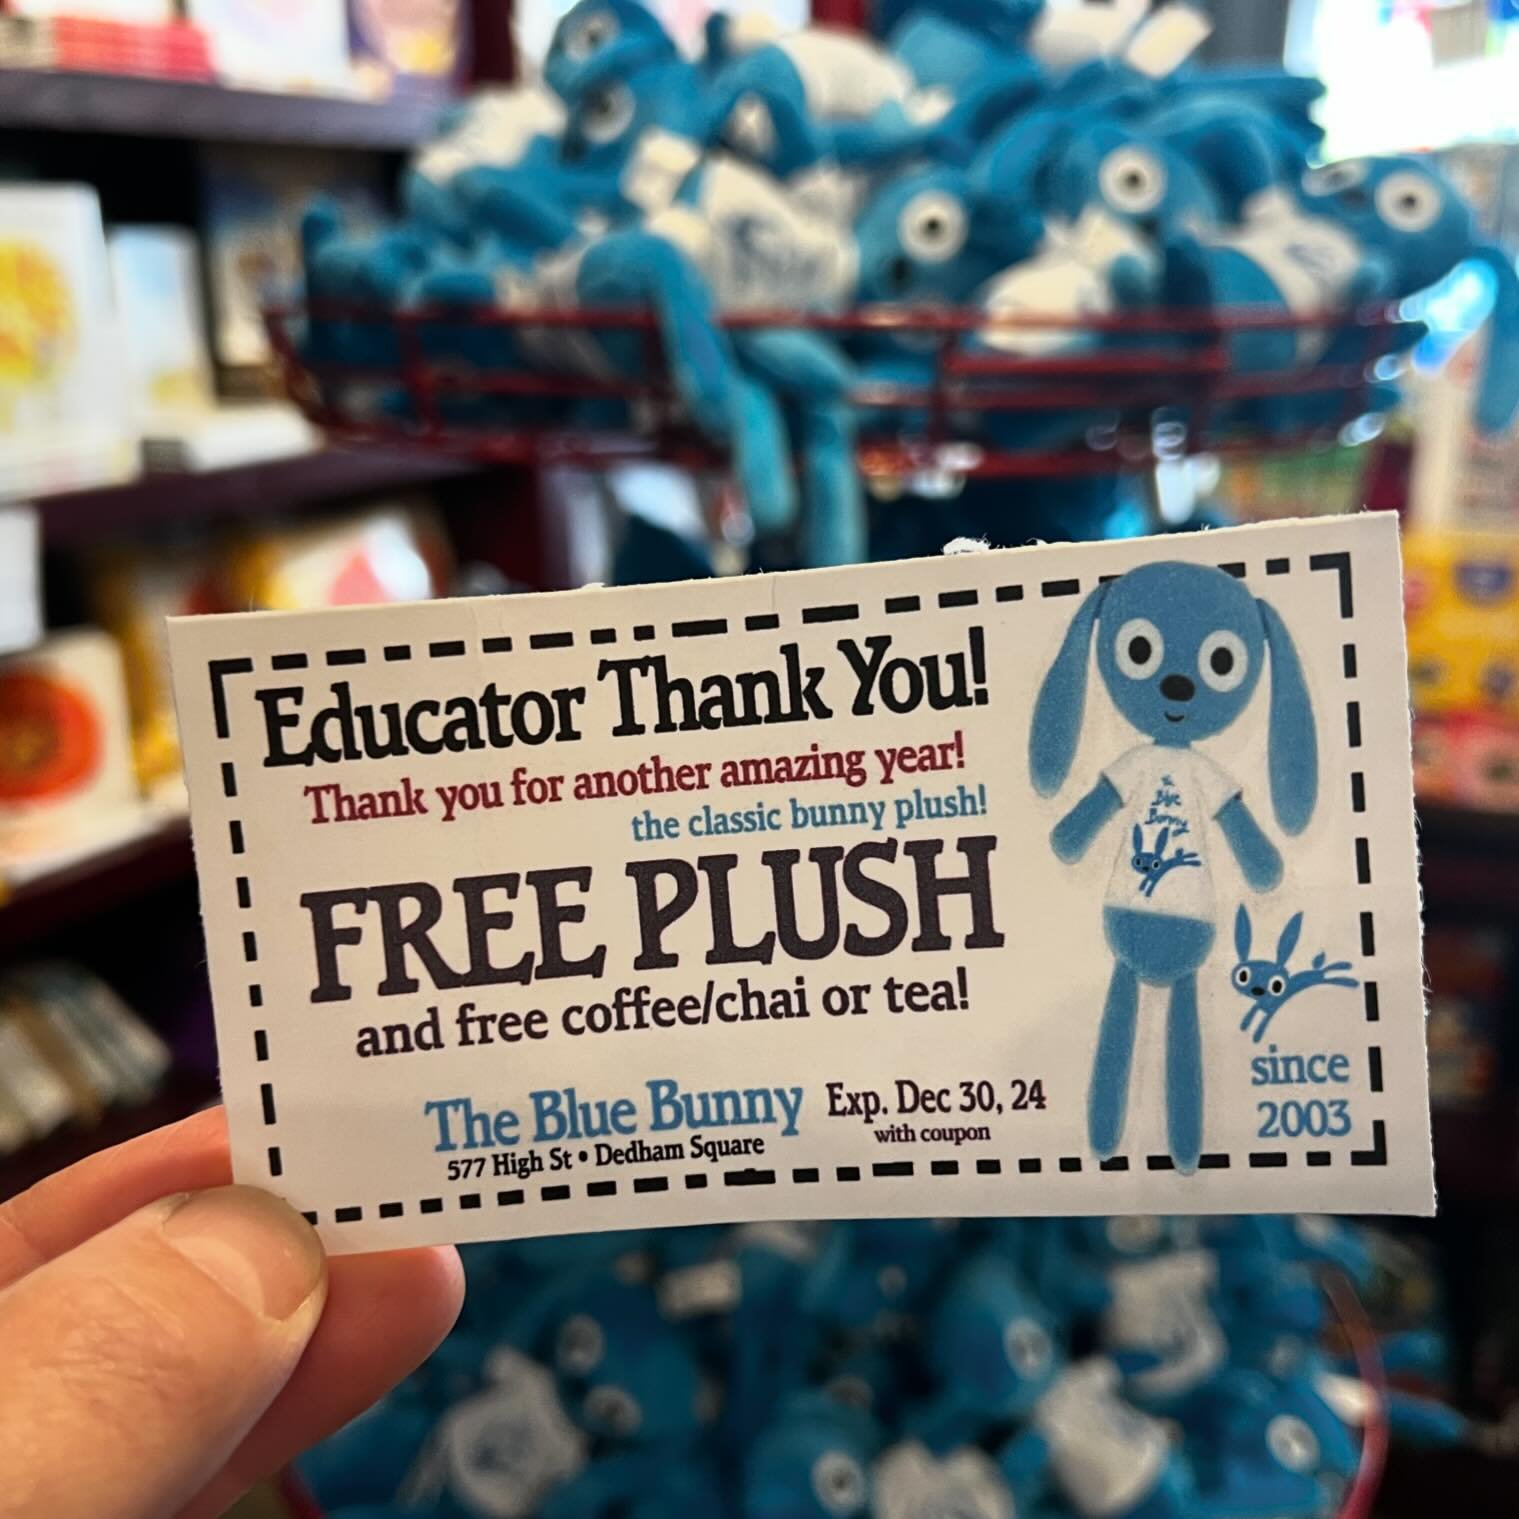 Thank you to our team volunteers who helped me deliver 274 TLC packages to the educators at all the elementary schools in Dedham including ECEC. The goodie bag consisted of inspirational, mini posters, a creativity, pencil, and this coupon for a free